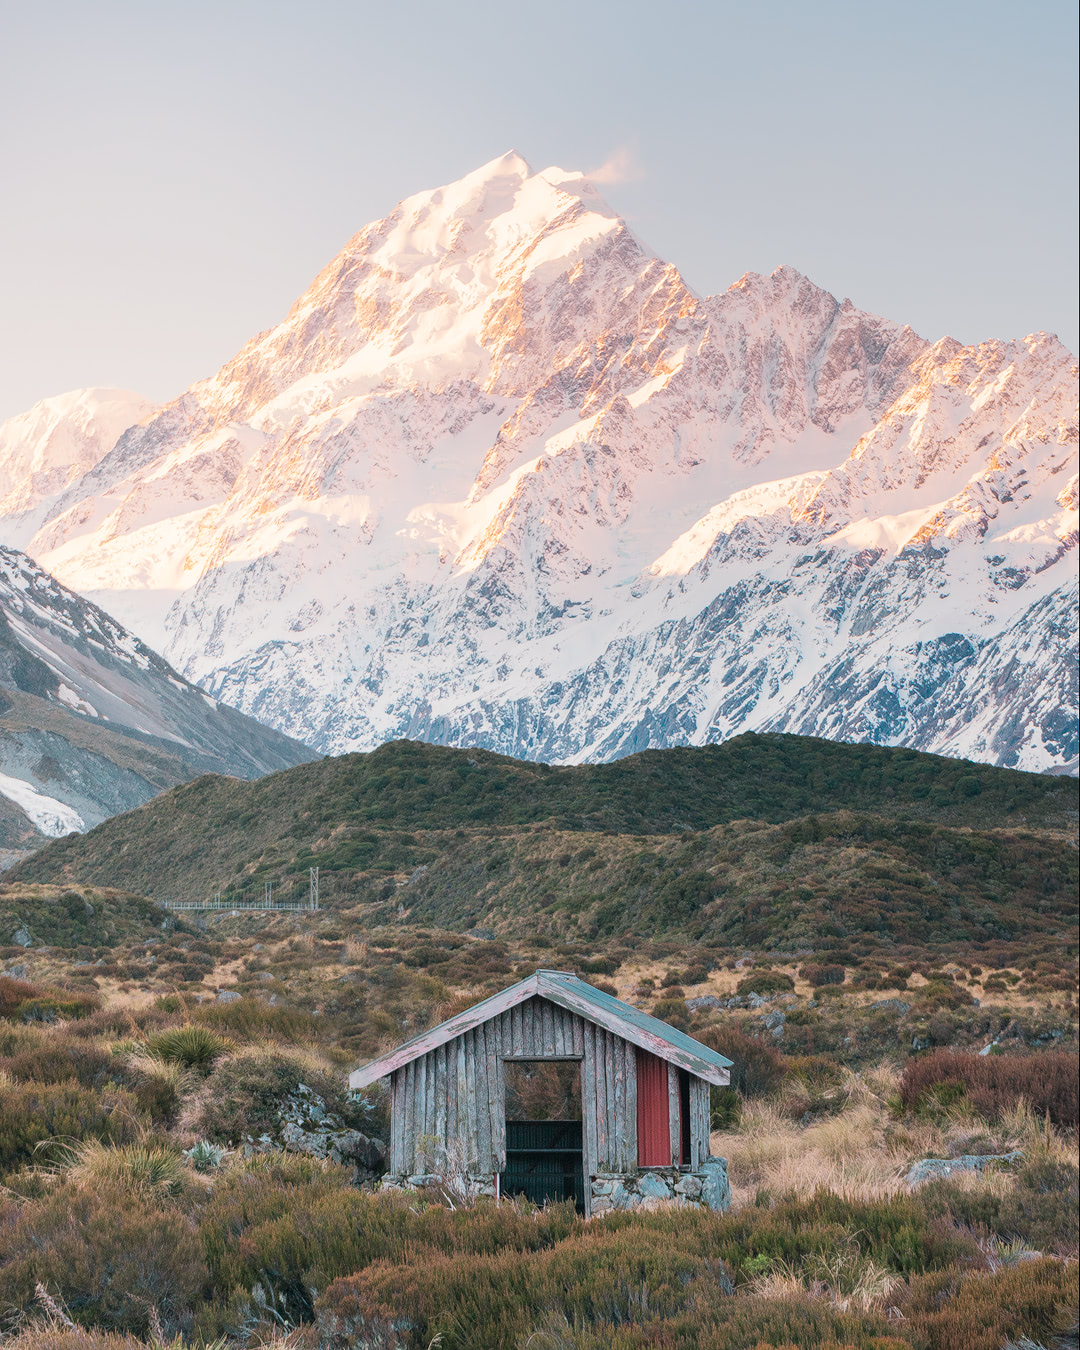 12 MUST SEE PLACES ON THE SOUTH ISLAND OF NEW ZEALAND - HOOKER VALLEY TRACK HUT MT COOK